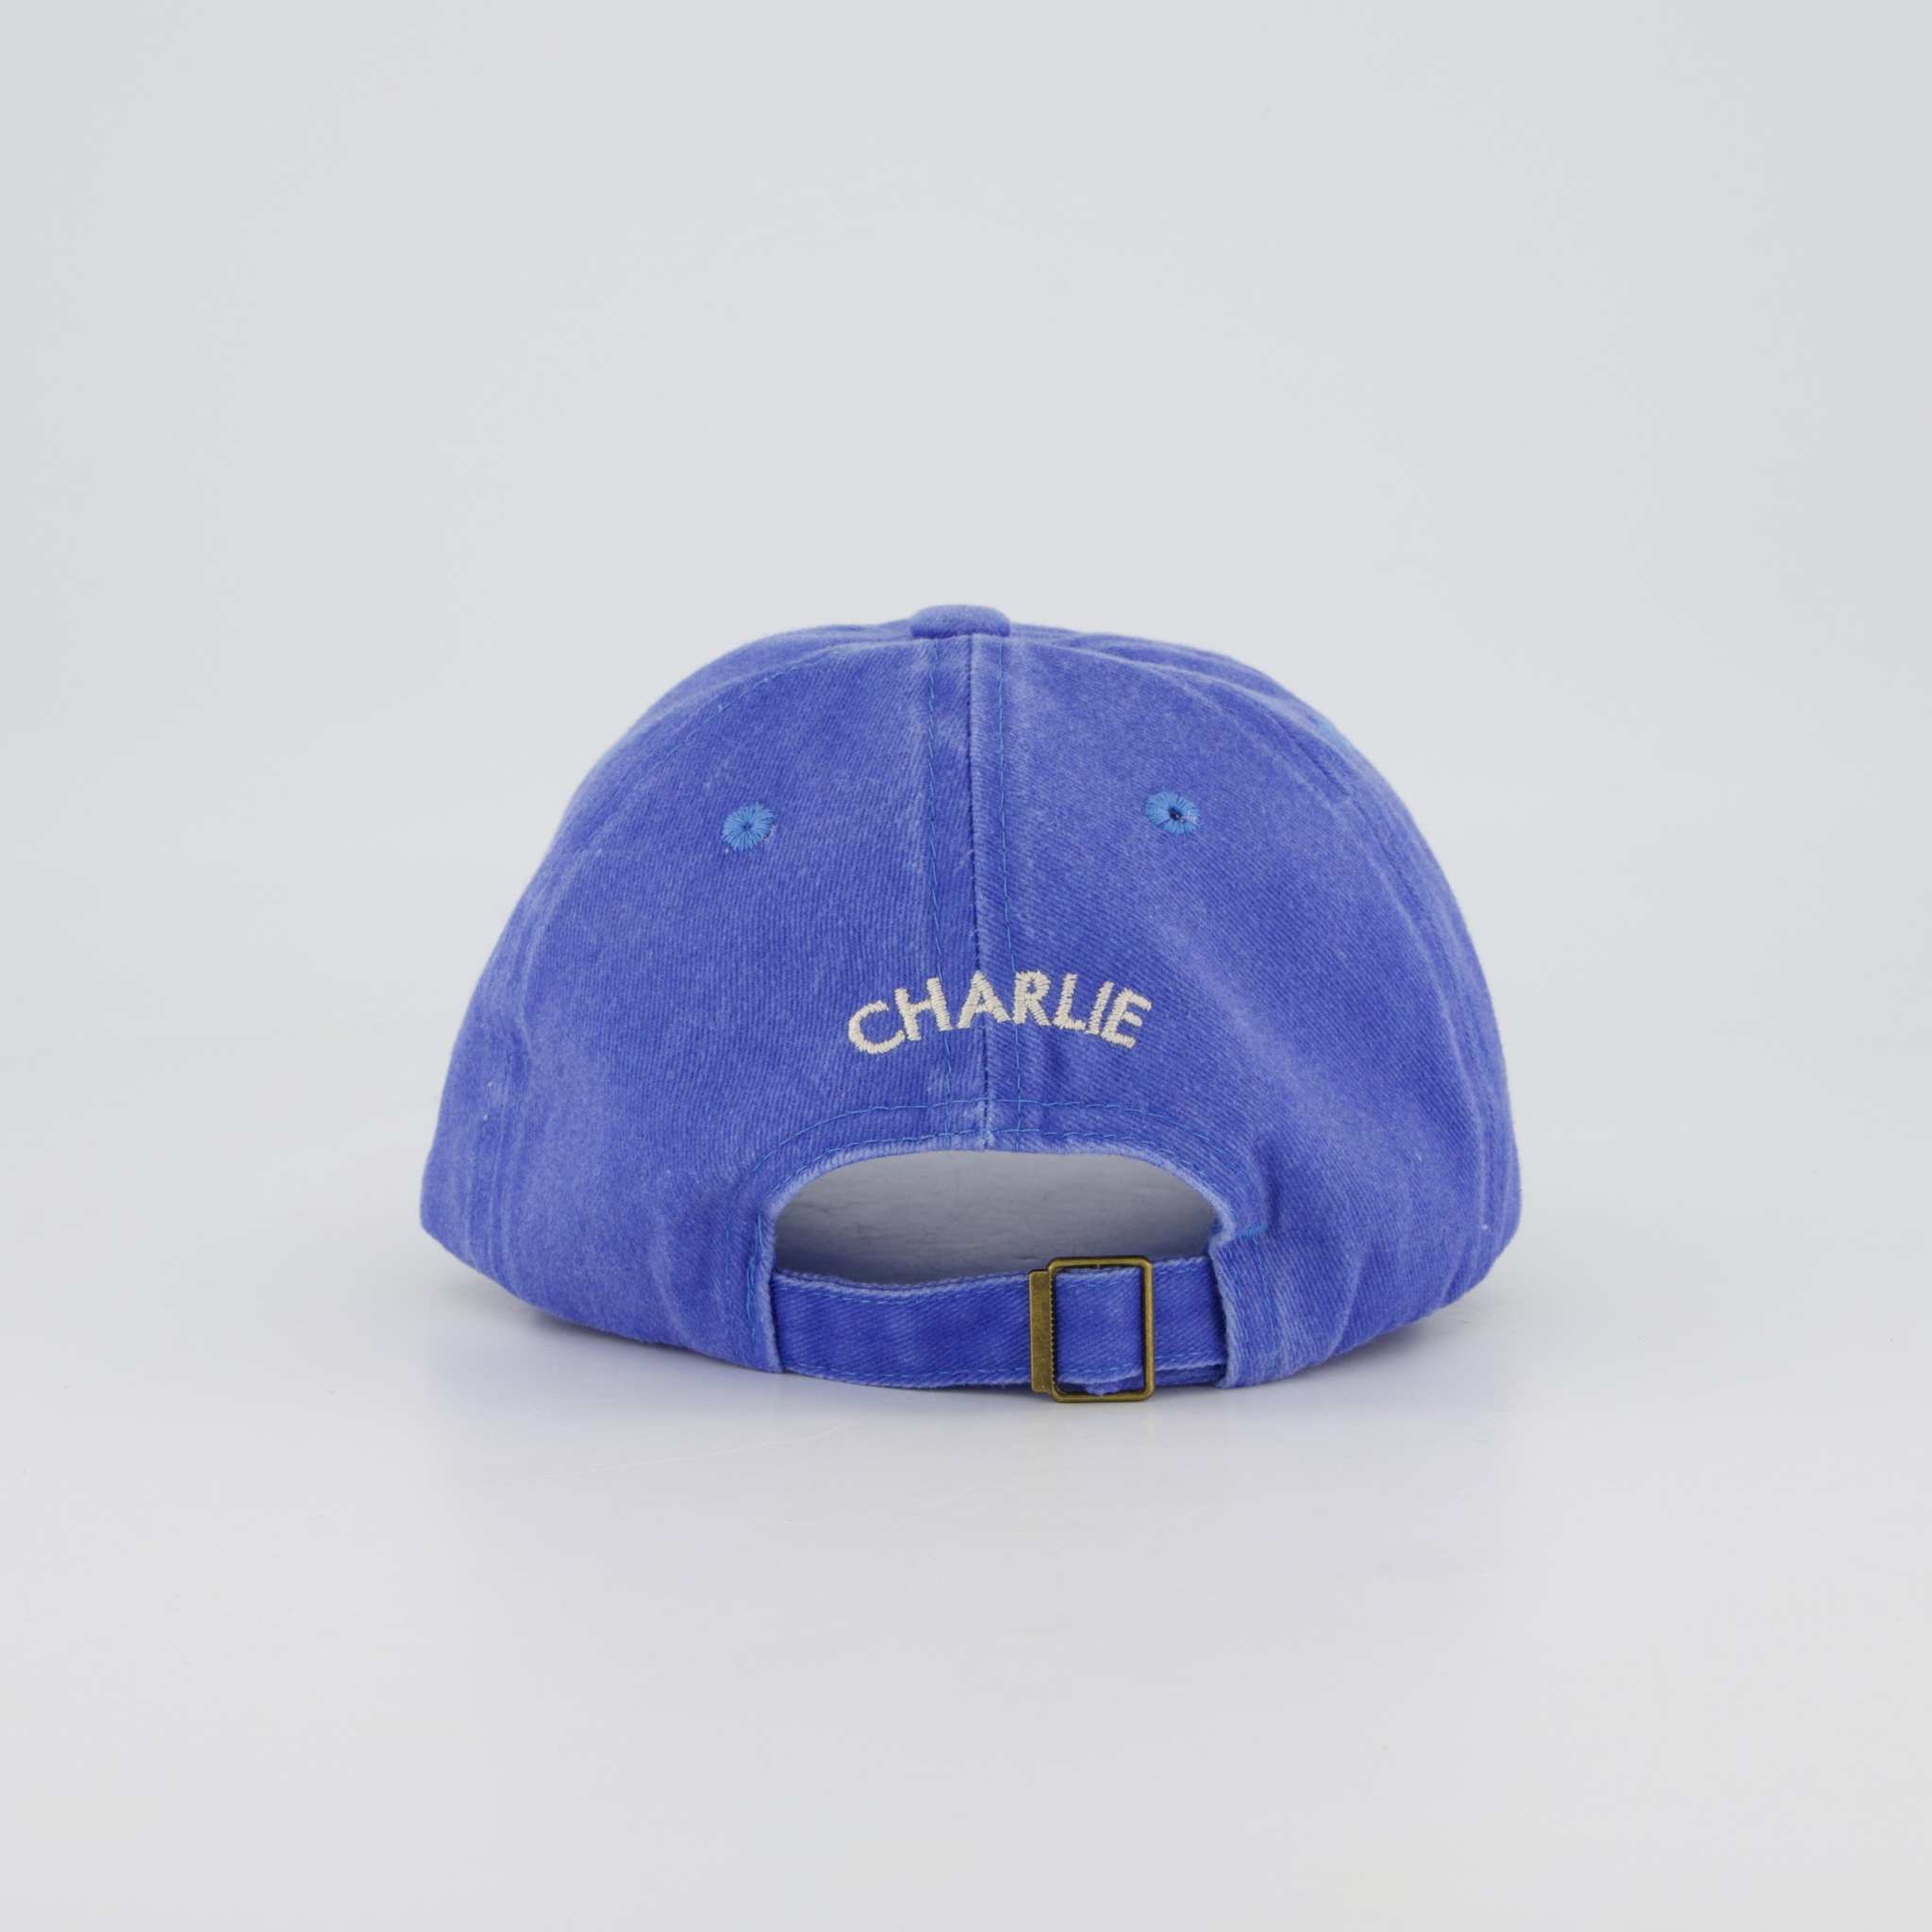 Bright Blue Personalised Hat with Hand-drawn Labradoodle Embroidery Design 